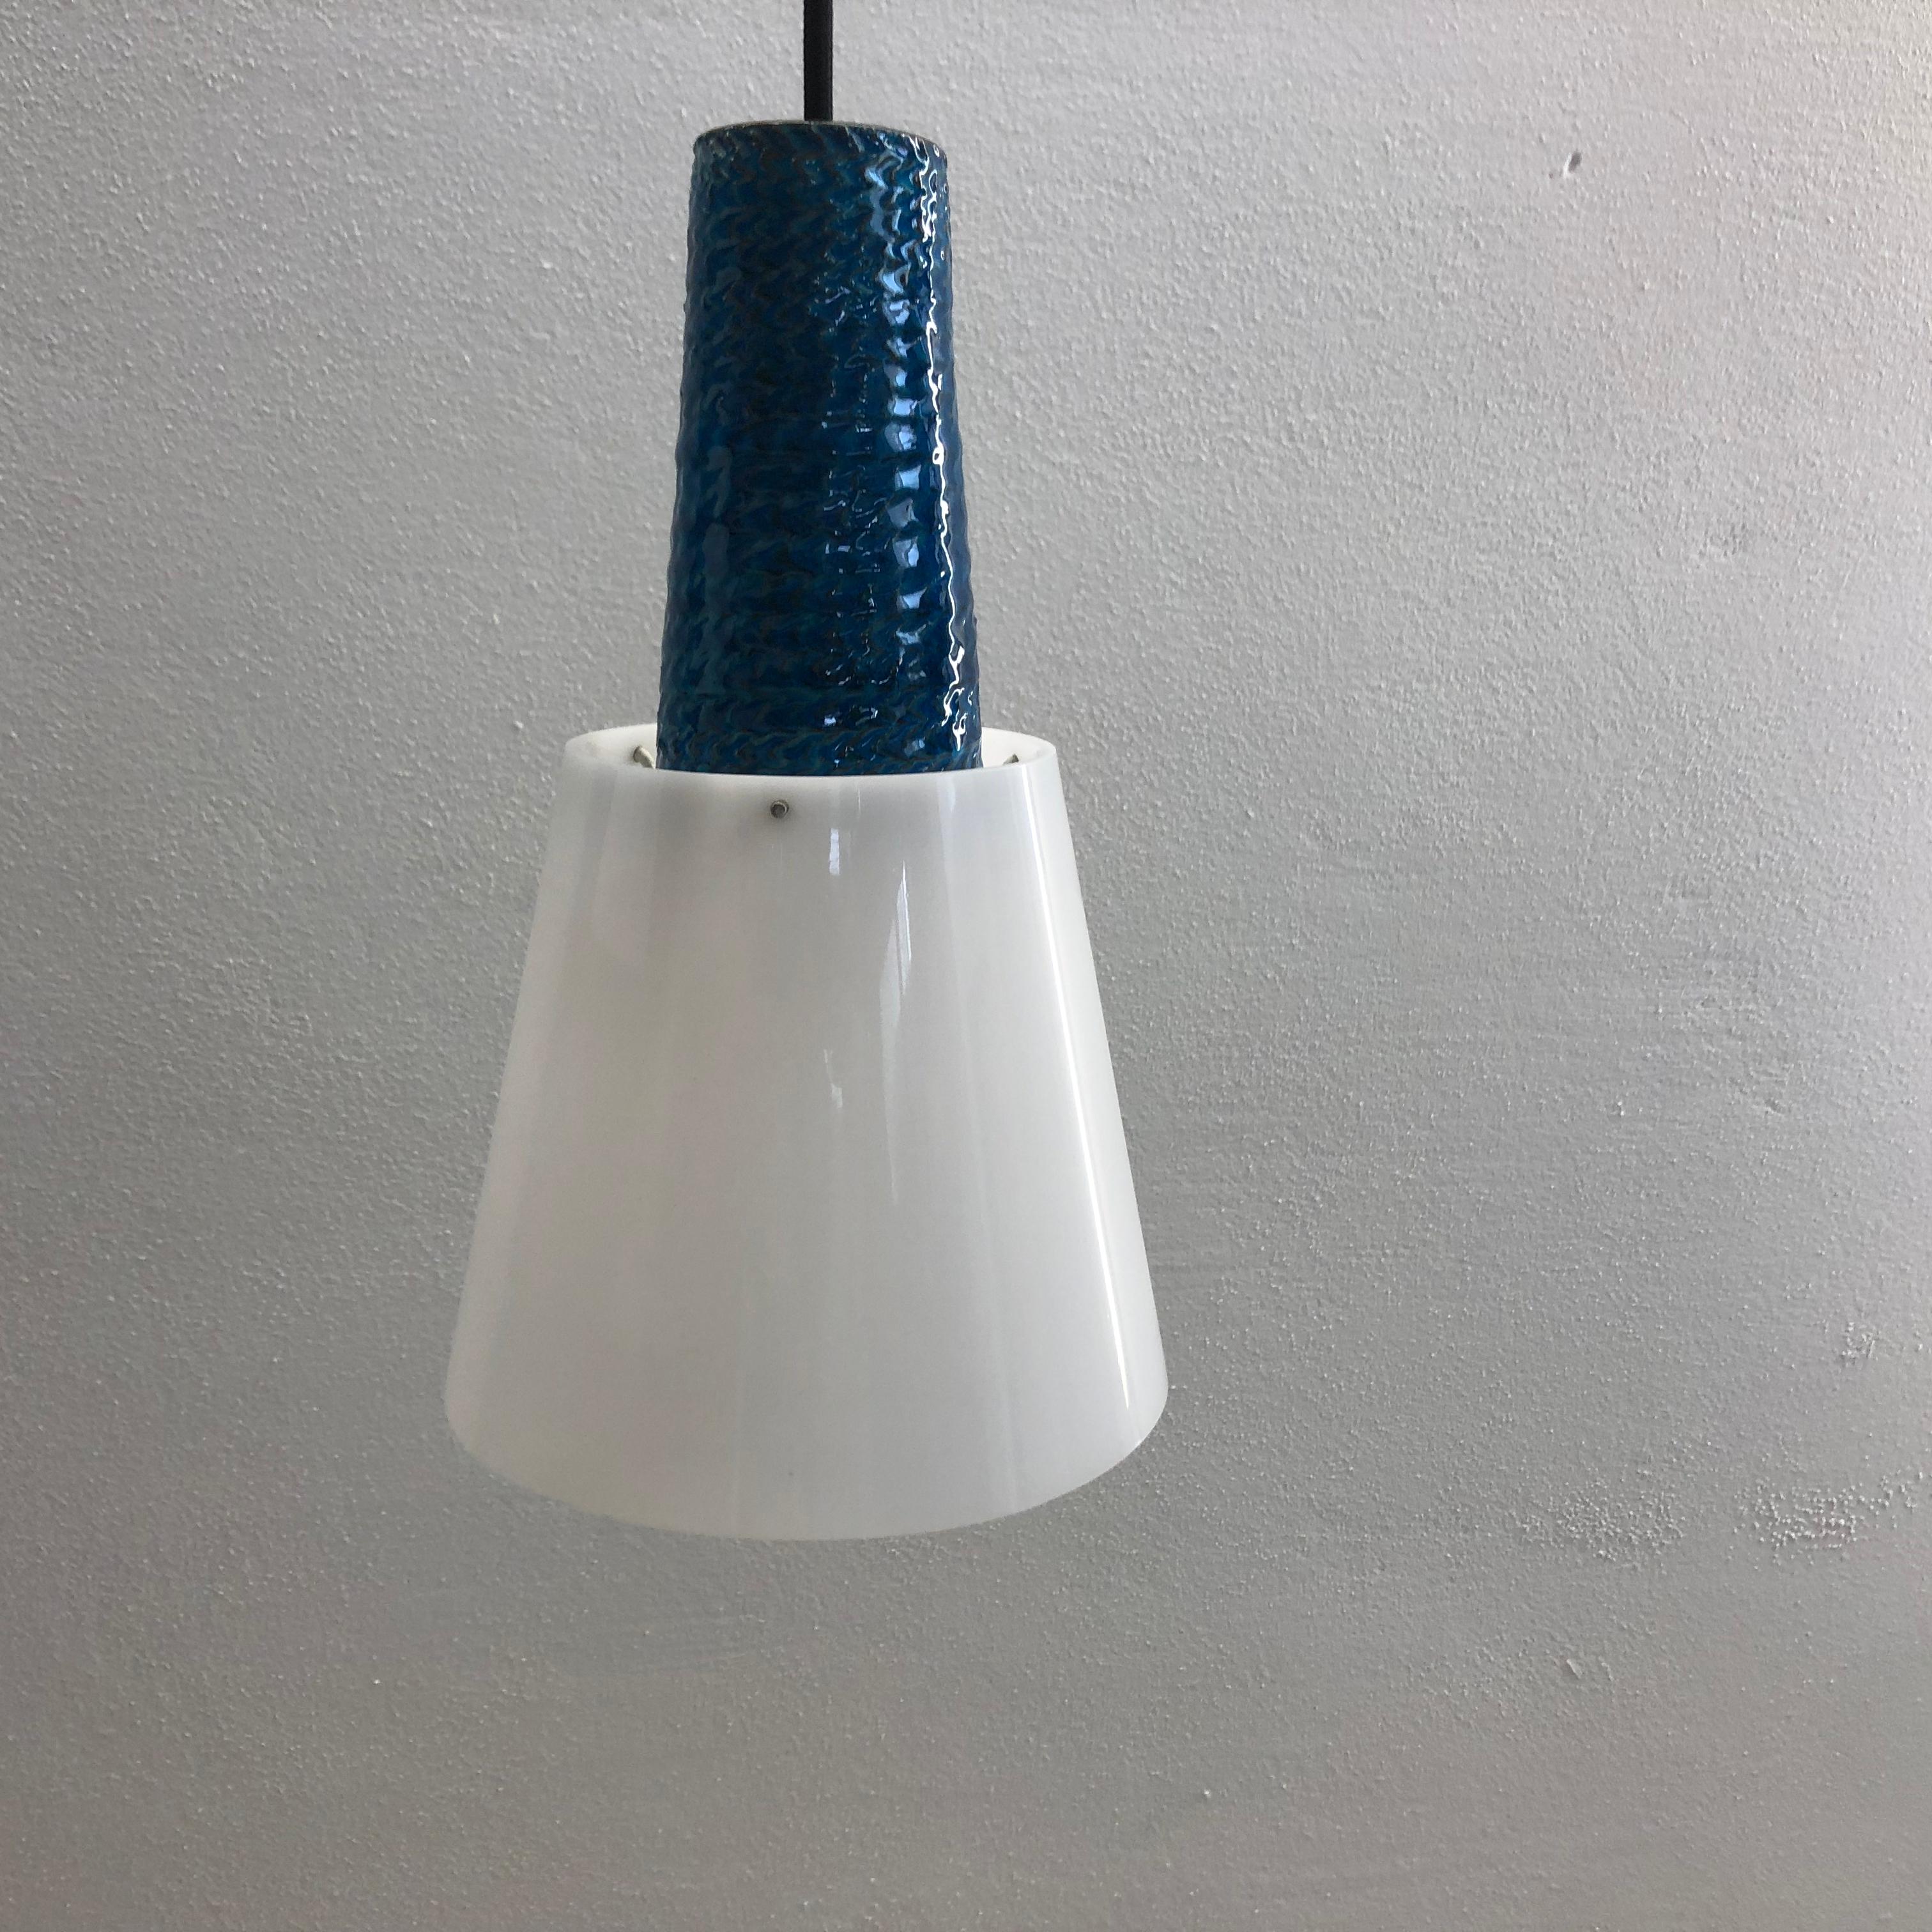 A rare couple of lamps from Herman A. Kähler in Næstved.
The shade and ceramic part is triangular shaped.

The lamps was designed by Nils Kähler in the years 1958-1965, after a collaboration with Le Klint who ended up in the classic trumpet-shaped